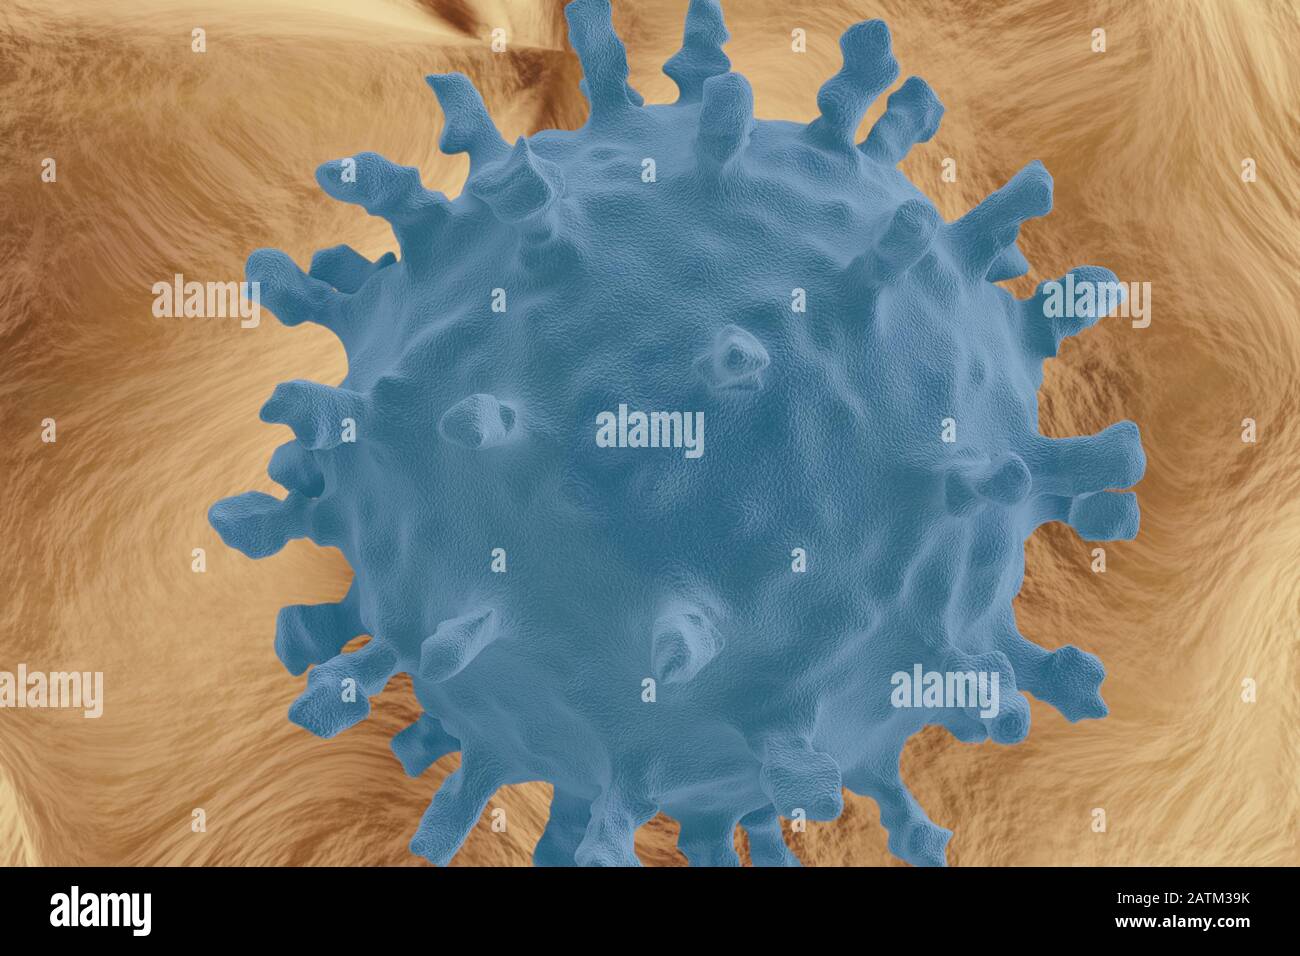 Scientific illustration of the Corona virus, 3D render based on microscopic images of the virus from th 2020 China outbreak Stock Photo